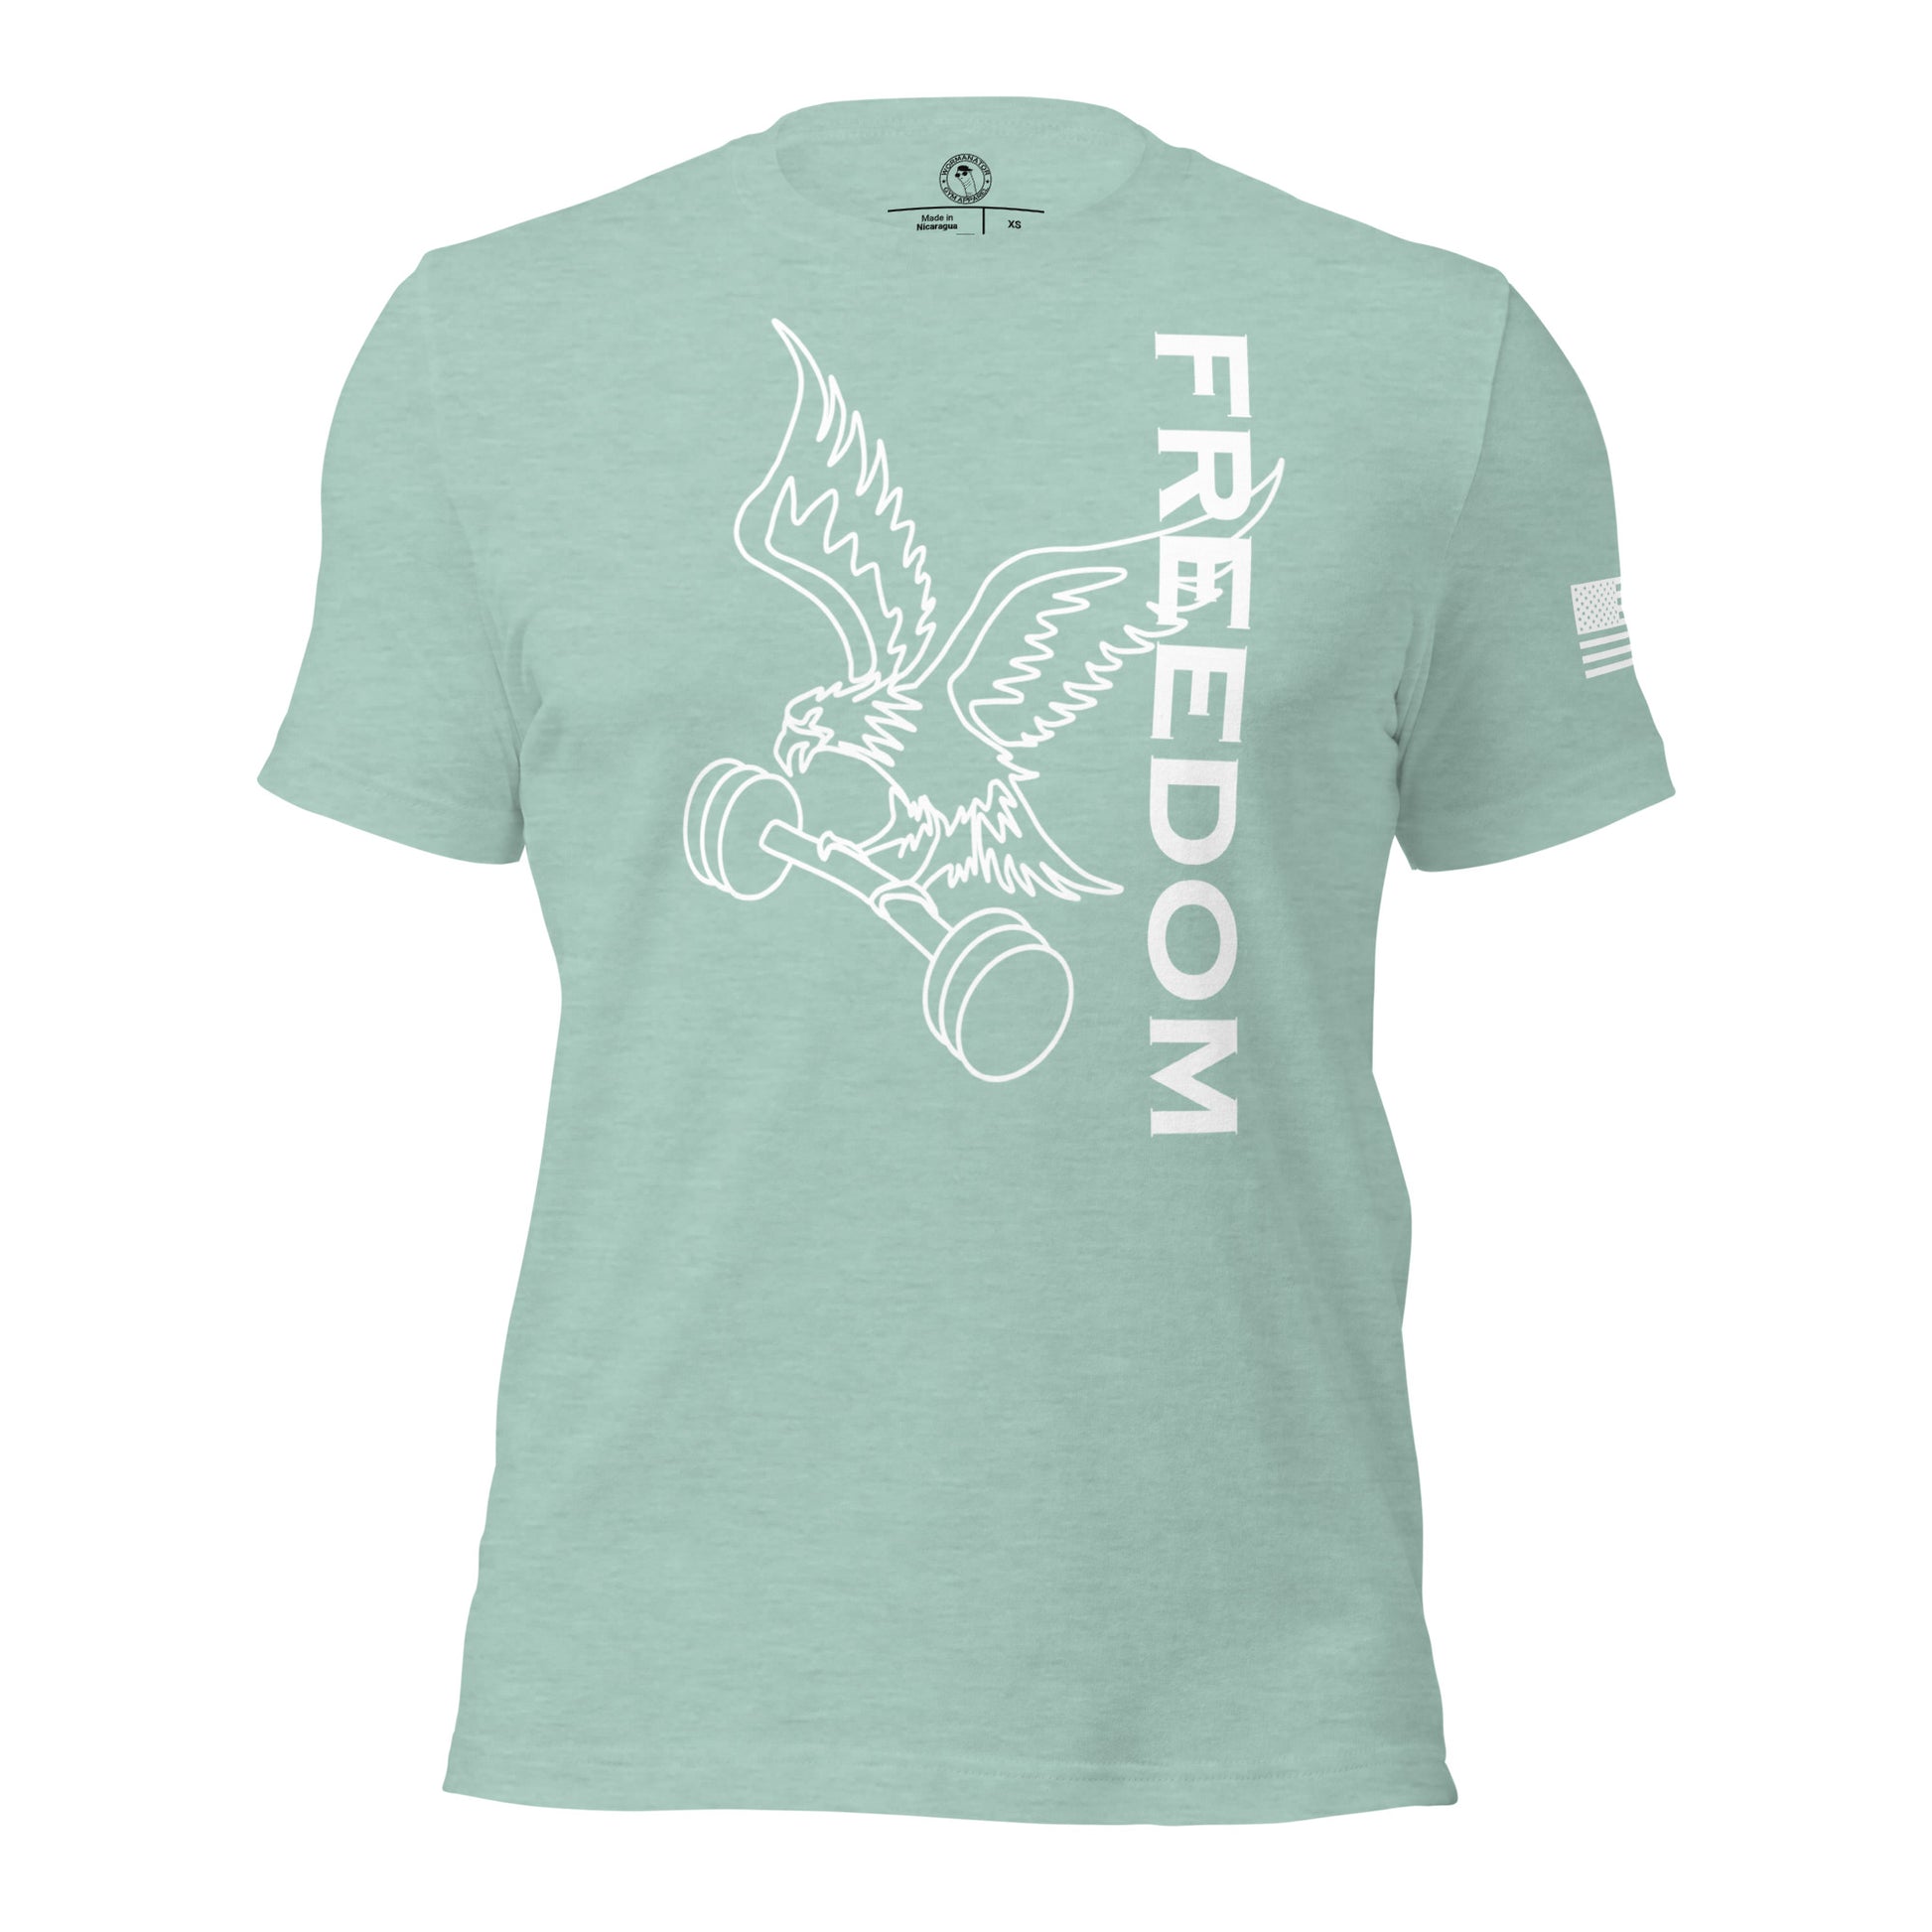 Reversed Freedom Eagle Barbell Shirt in Heather Prism Dusty Blue